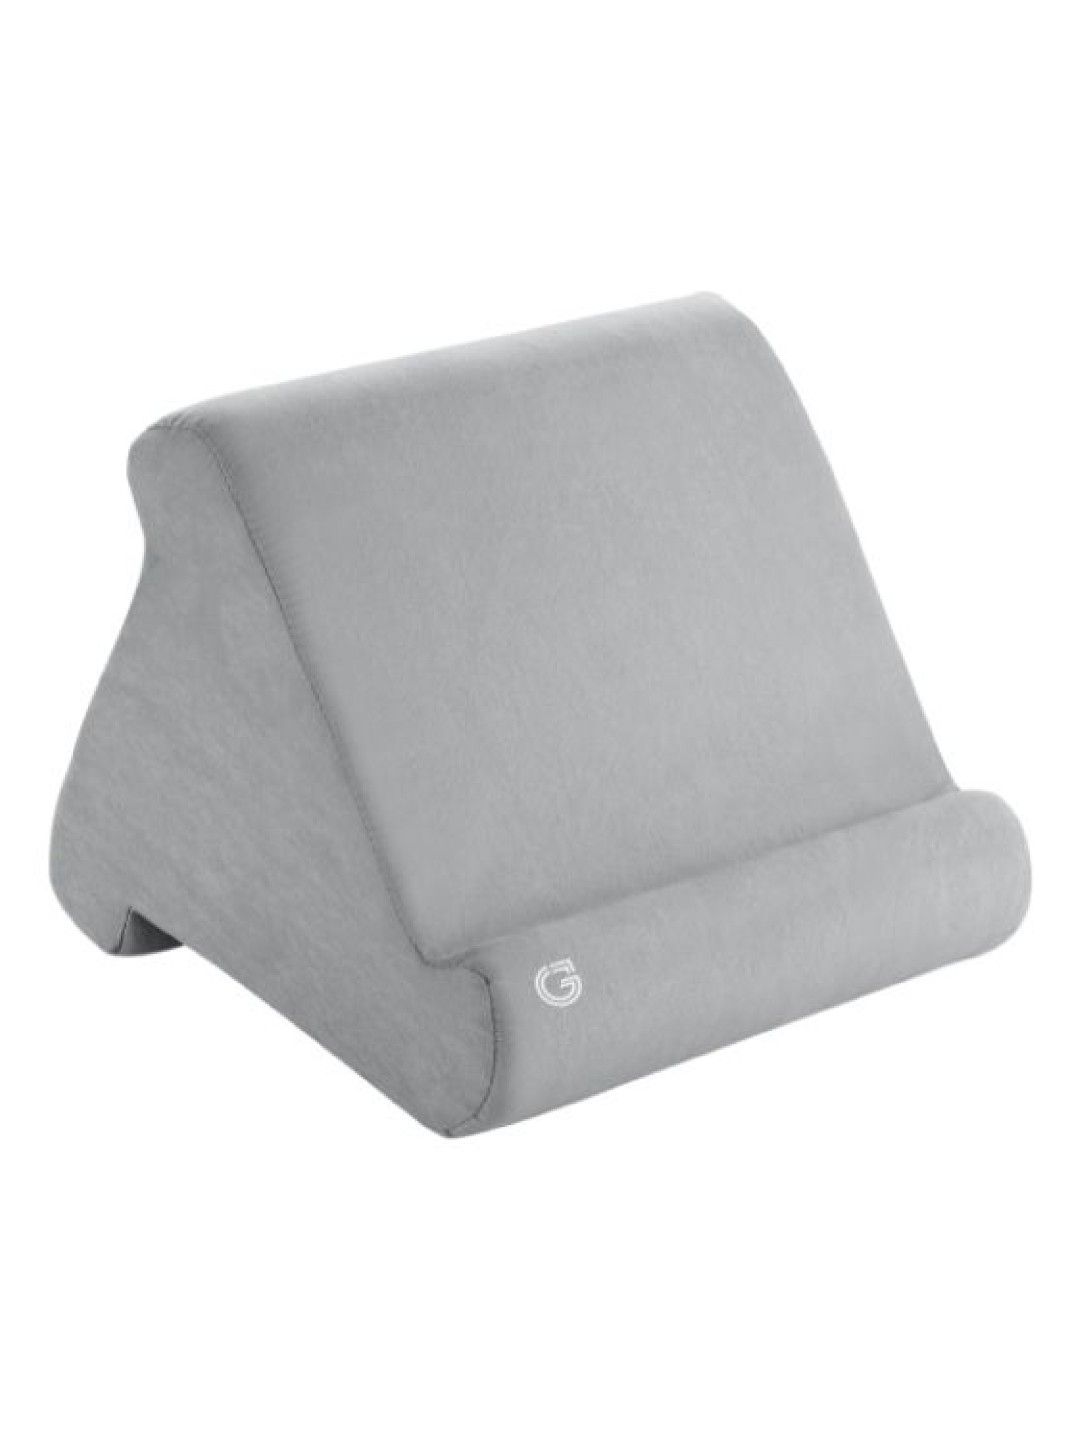 Sunbeams Lifestyle Gray Label Premium Tablet Pillow Stand (No Color- Image 1)